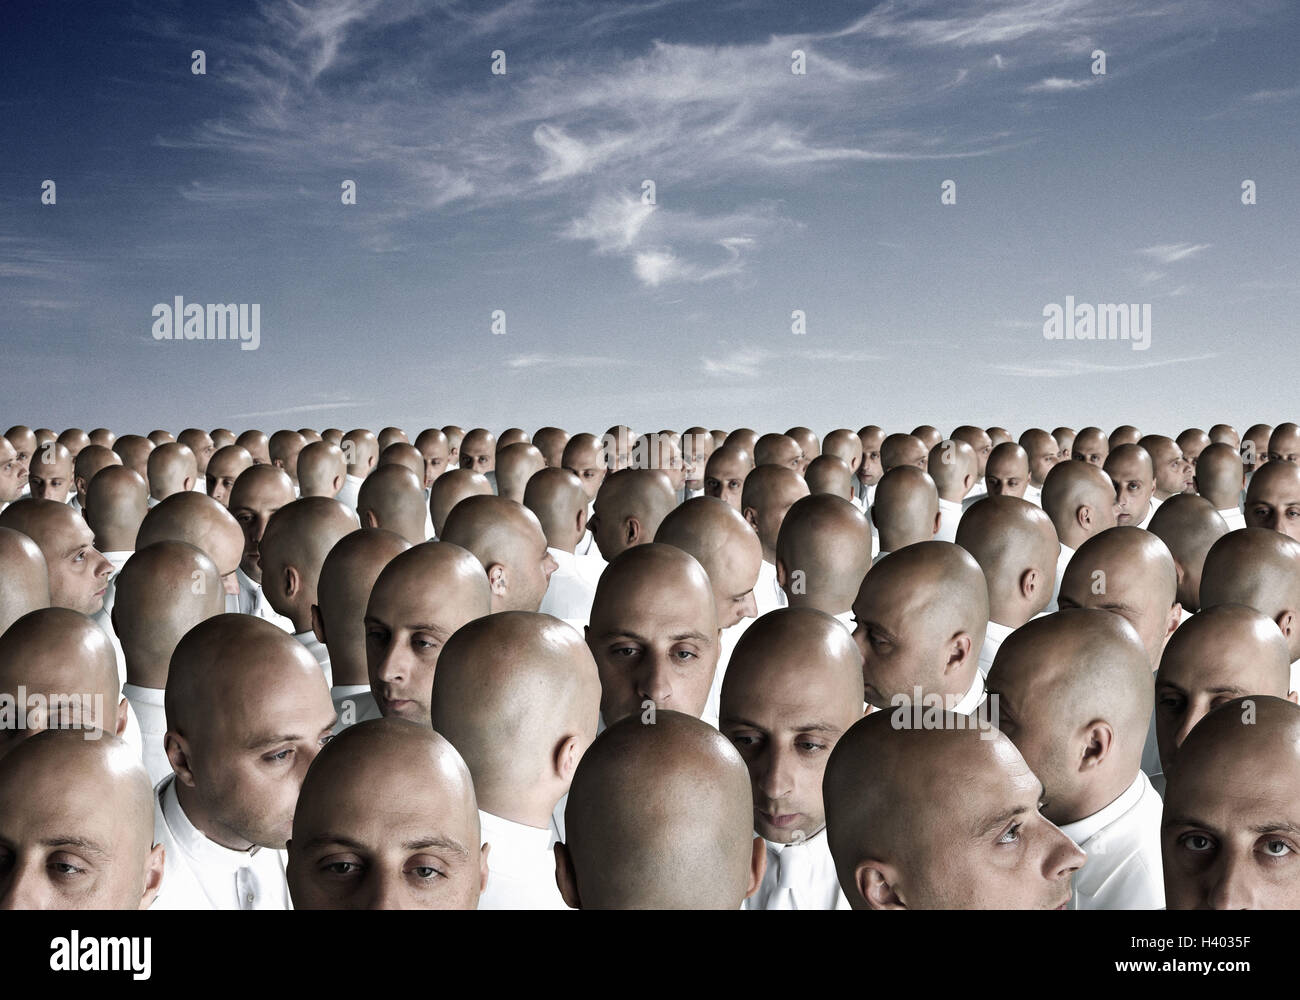 composing-crowd-people-men-clones-equality-expression-identically-H4035F.jpg